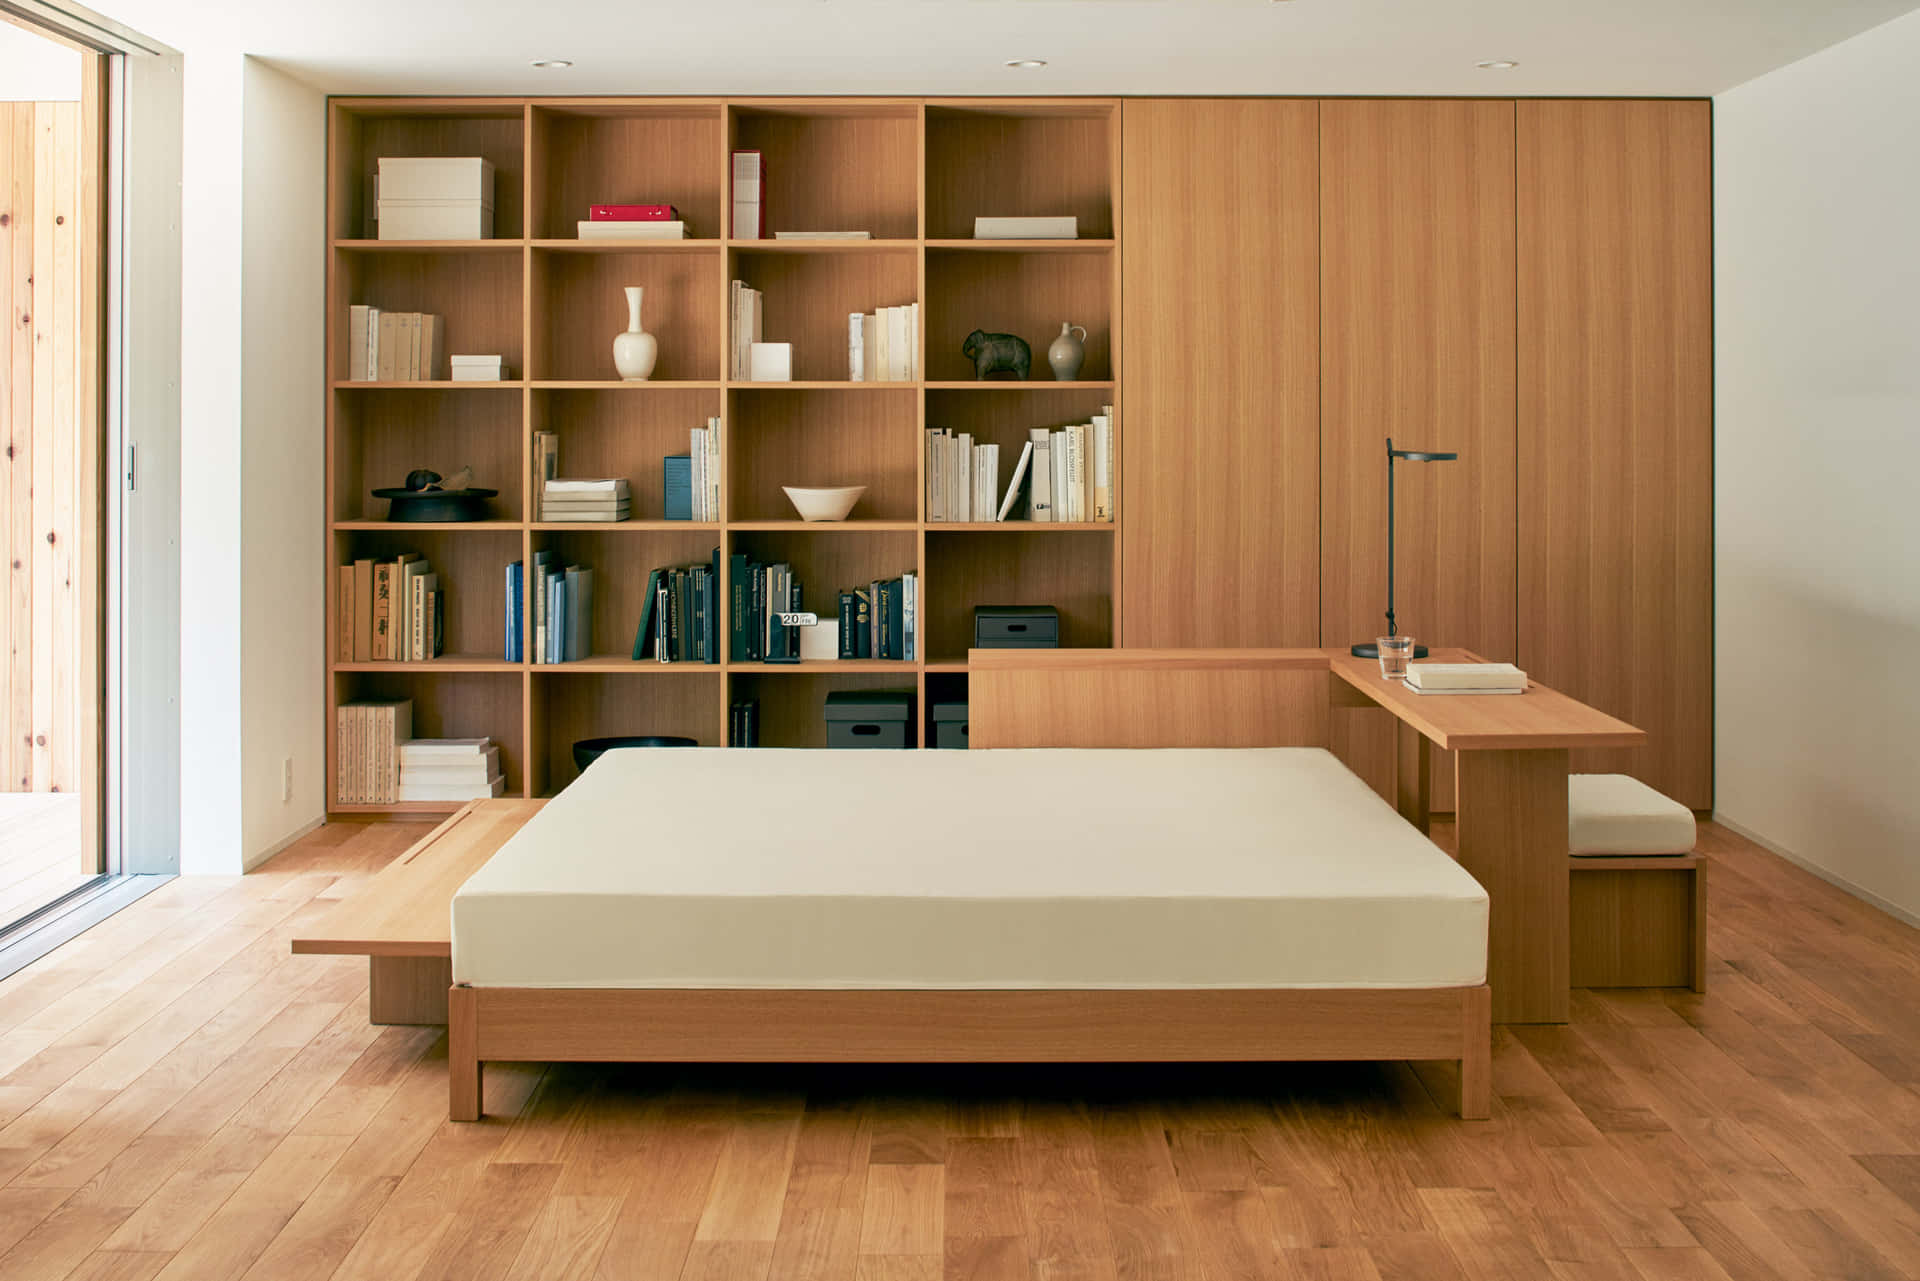 A Bed In A Room With A Bookcase